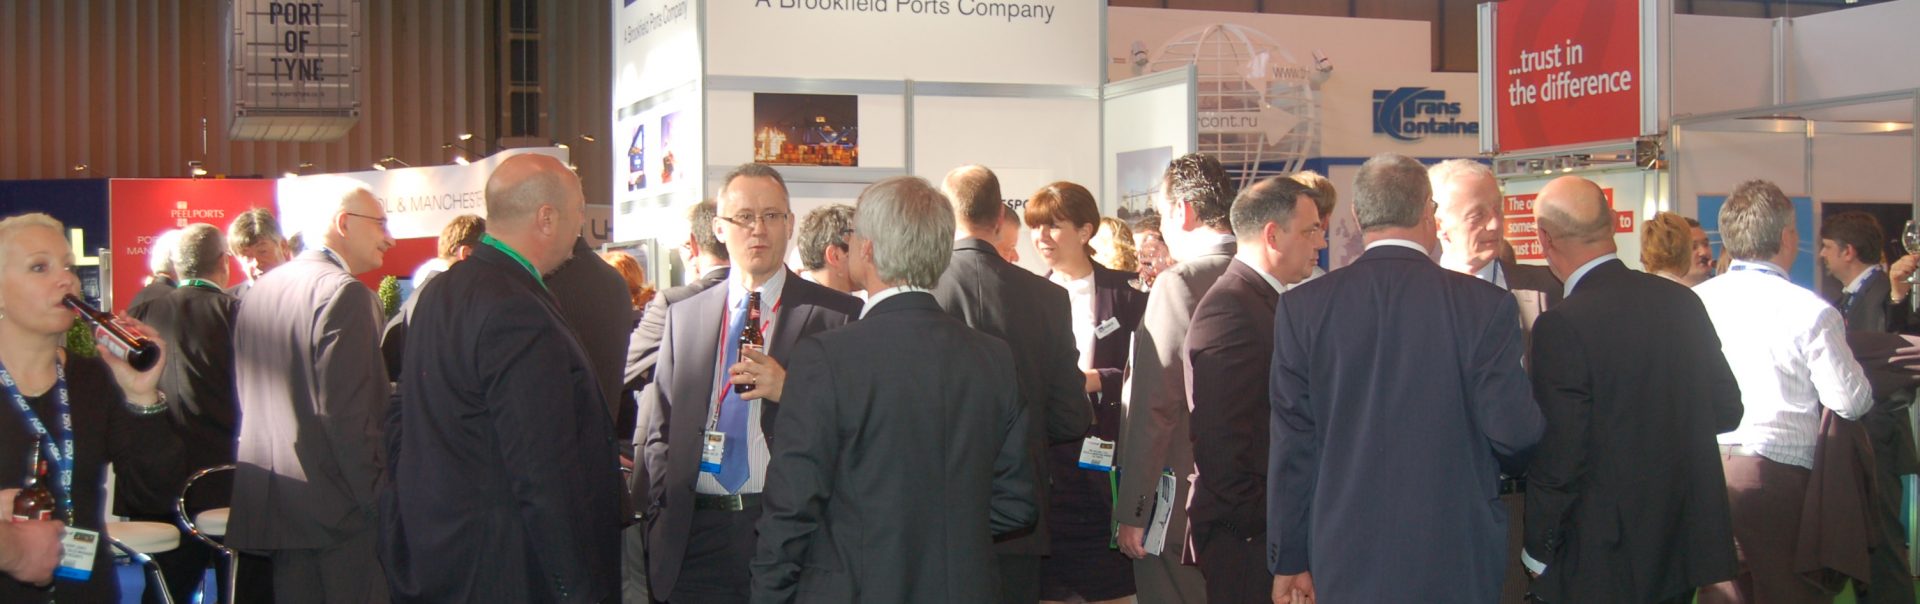 PD Ports promotes Portcentric at Multimodal 2011